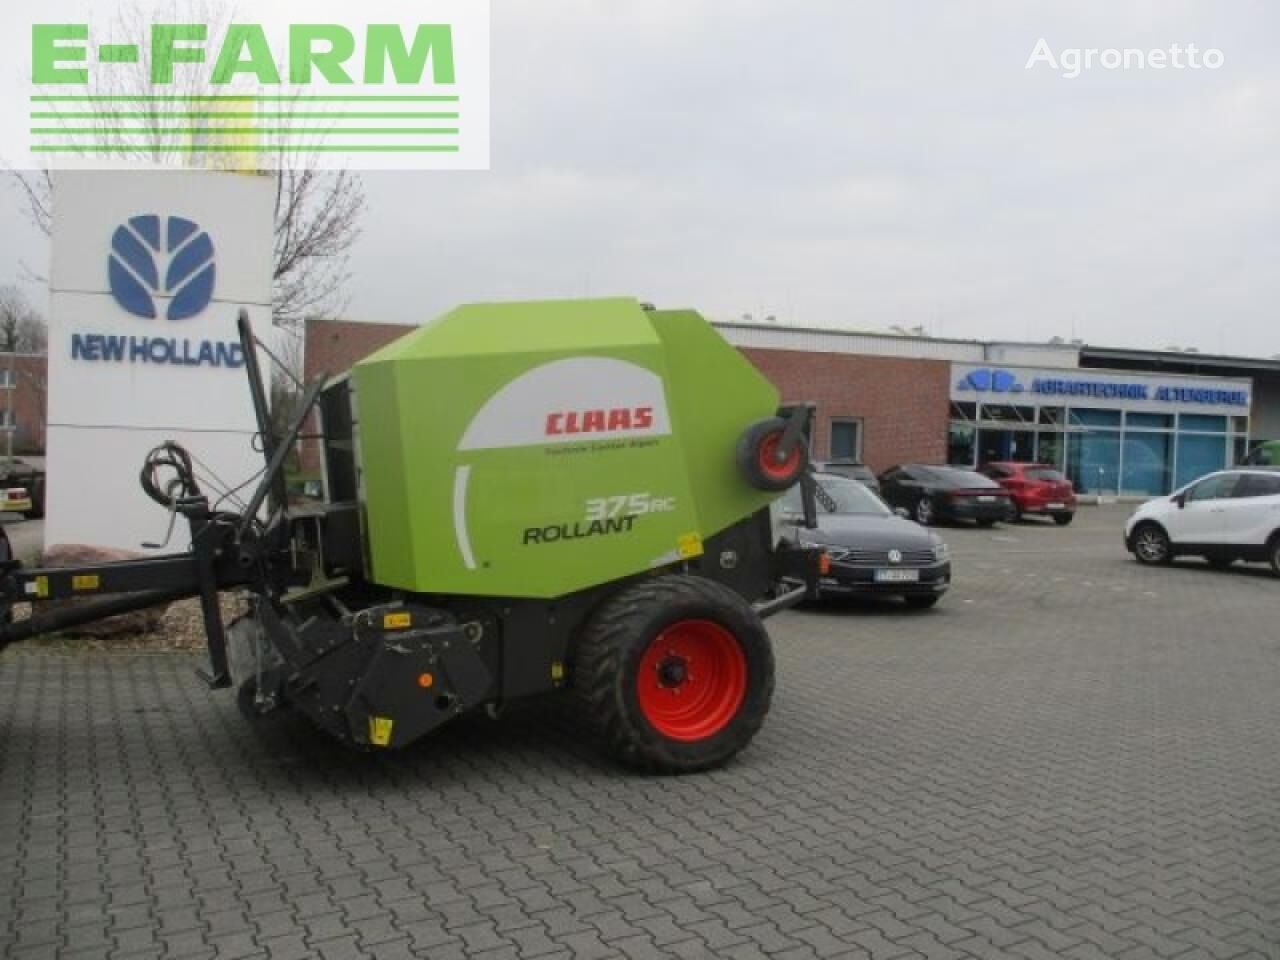 Claas rollant 375 rc square baler